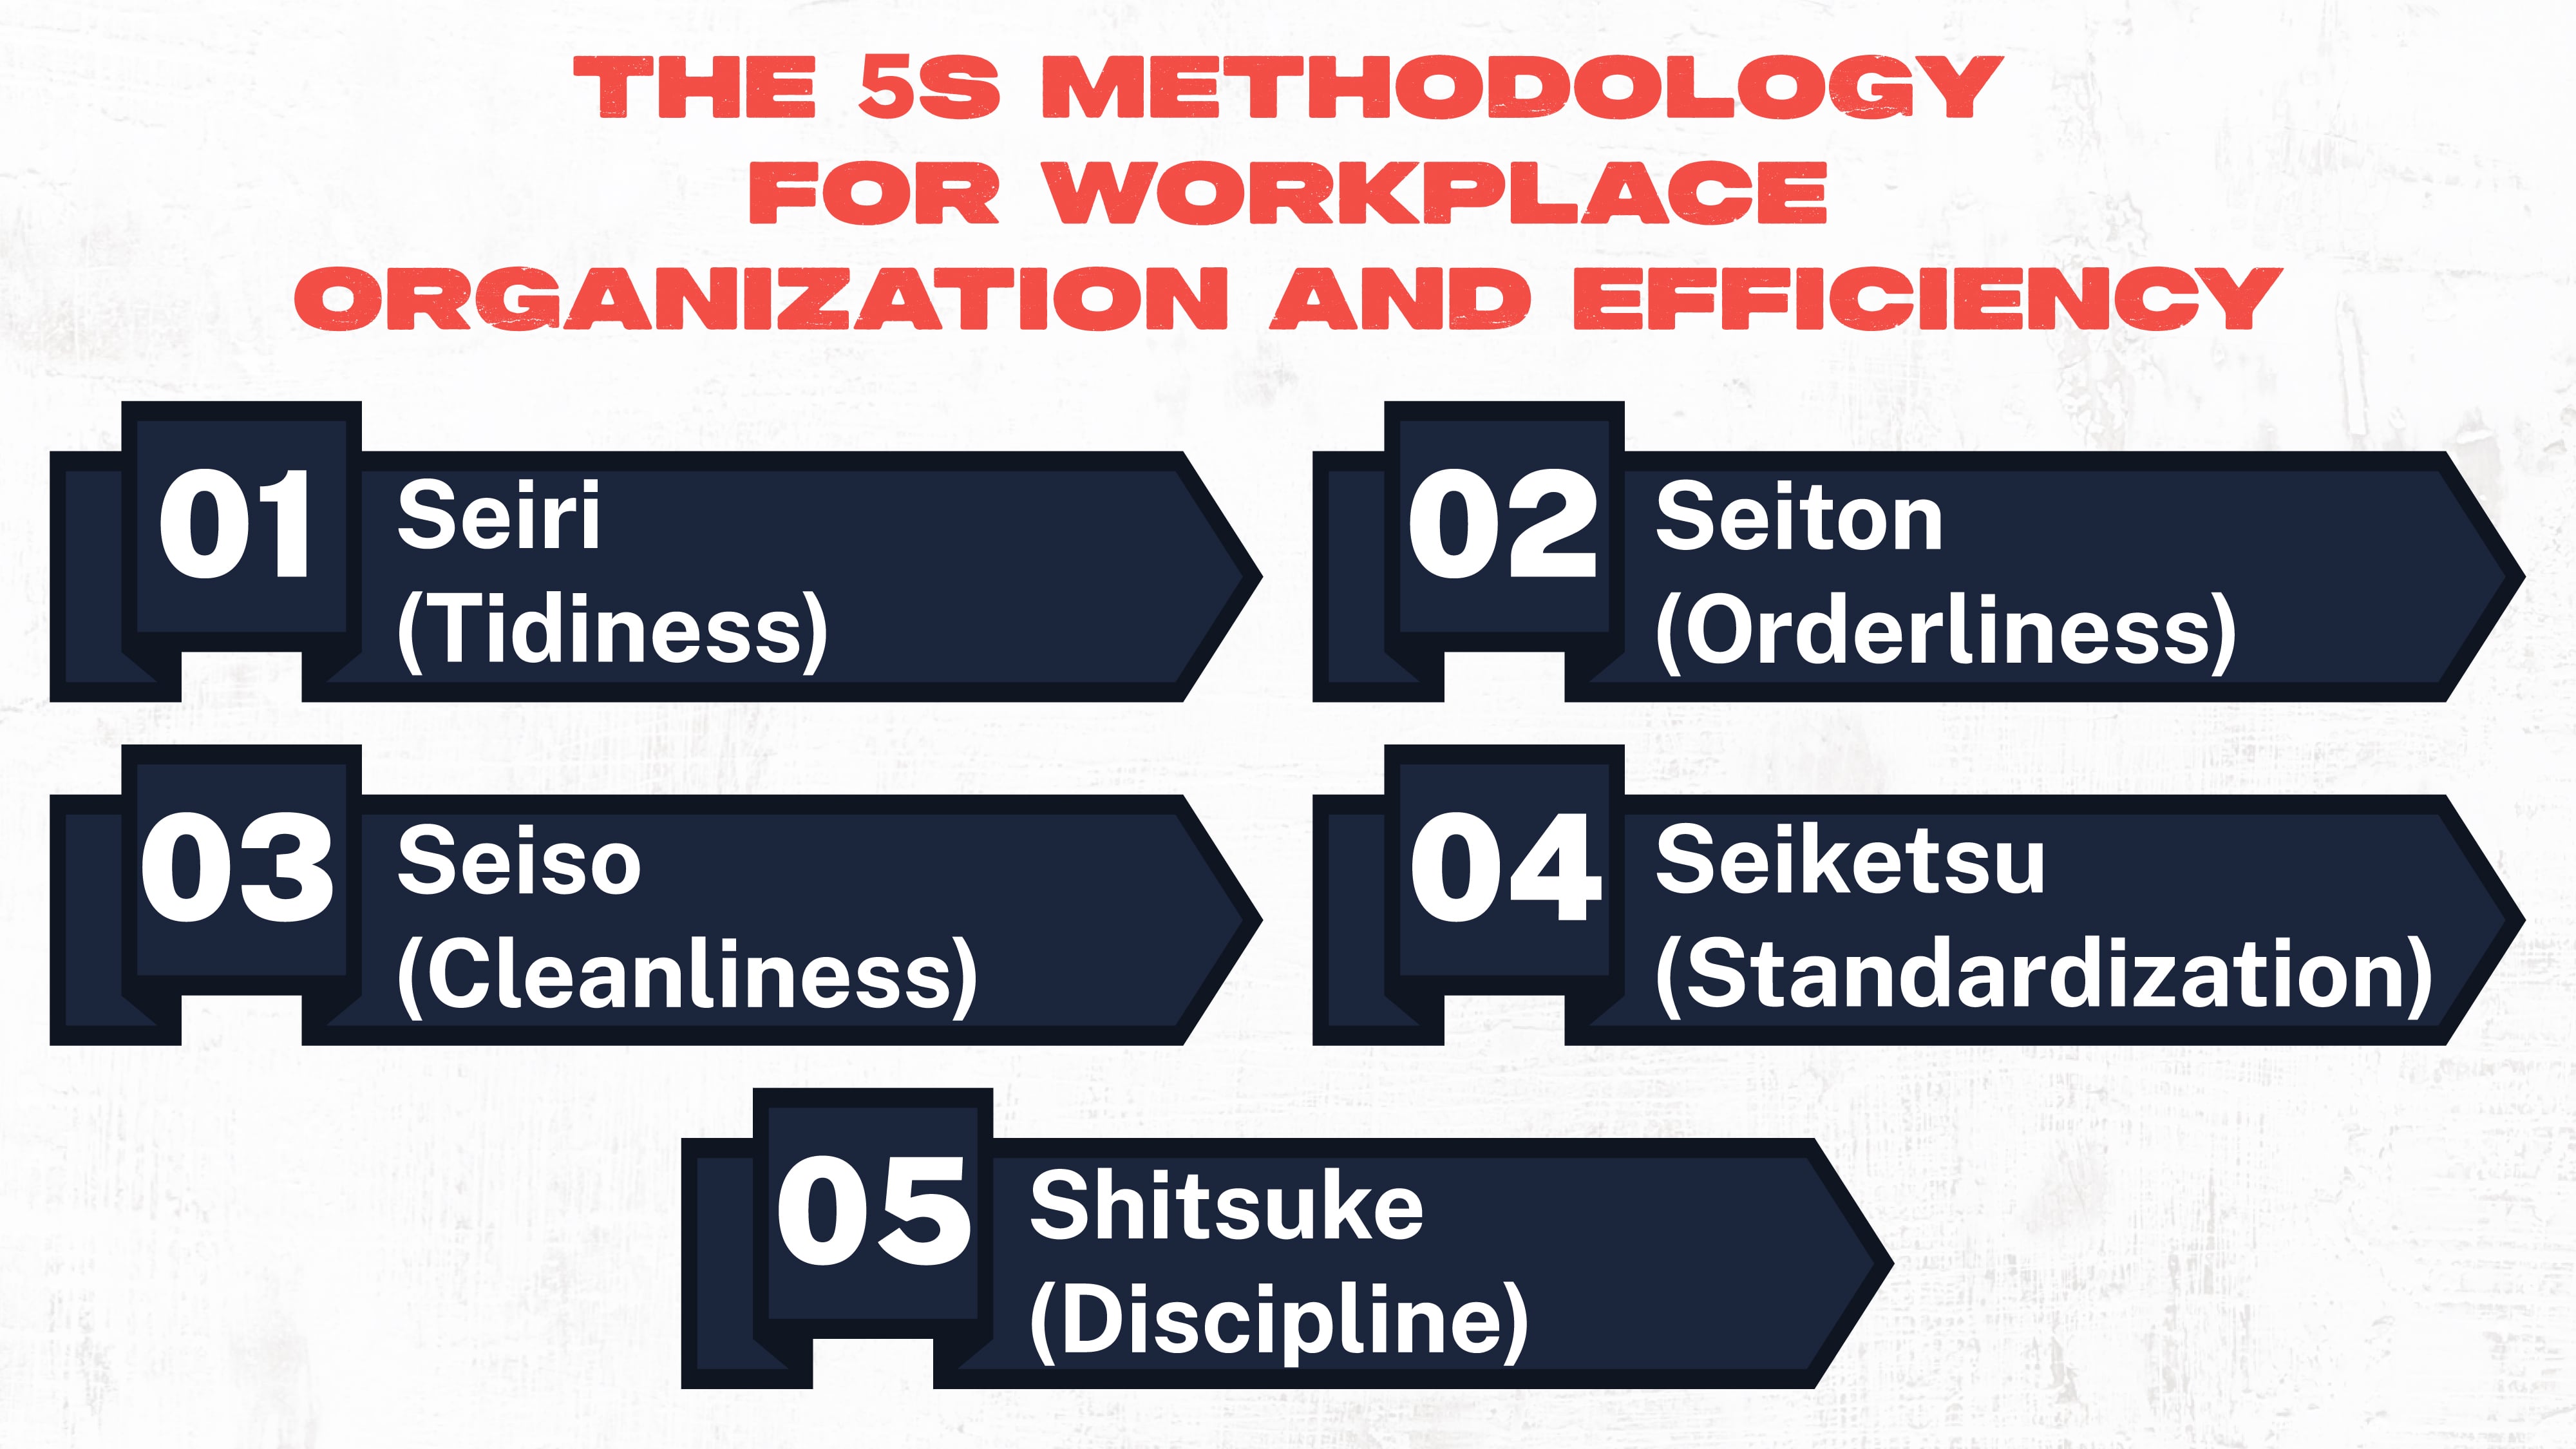 THE 5S METHODOLOGY FOR WORKPLACE ORGANIZATION AND EFFICIENCY